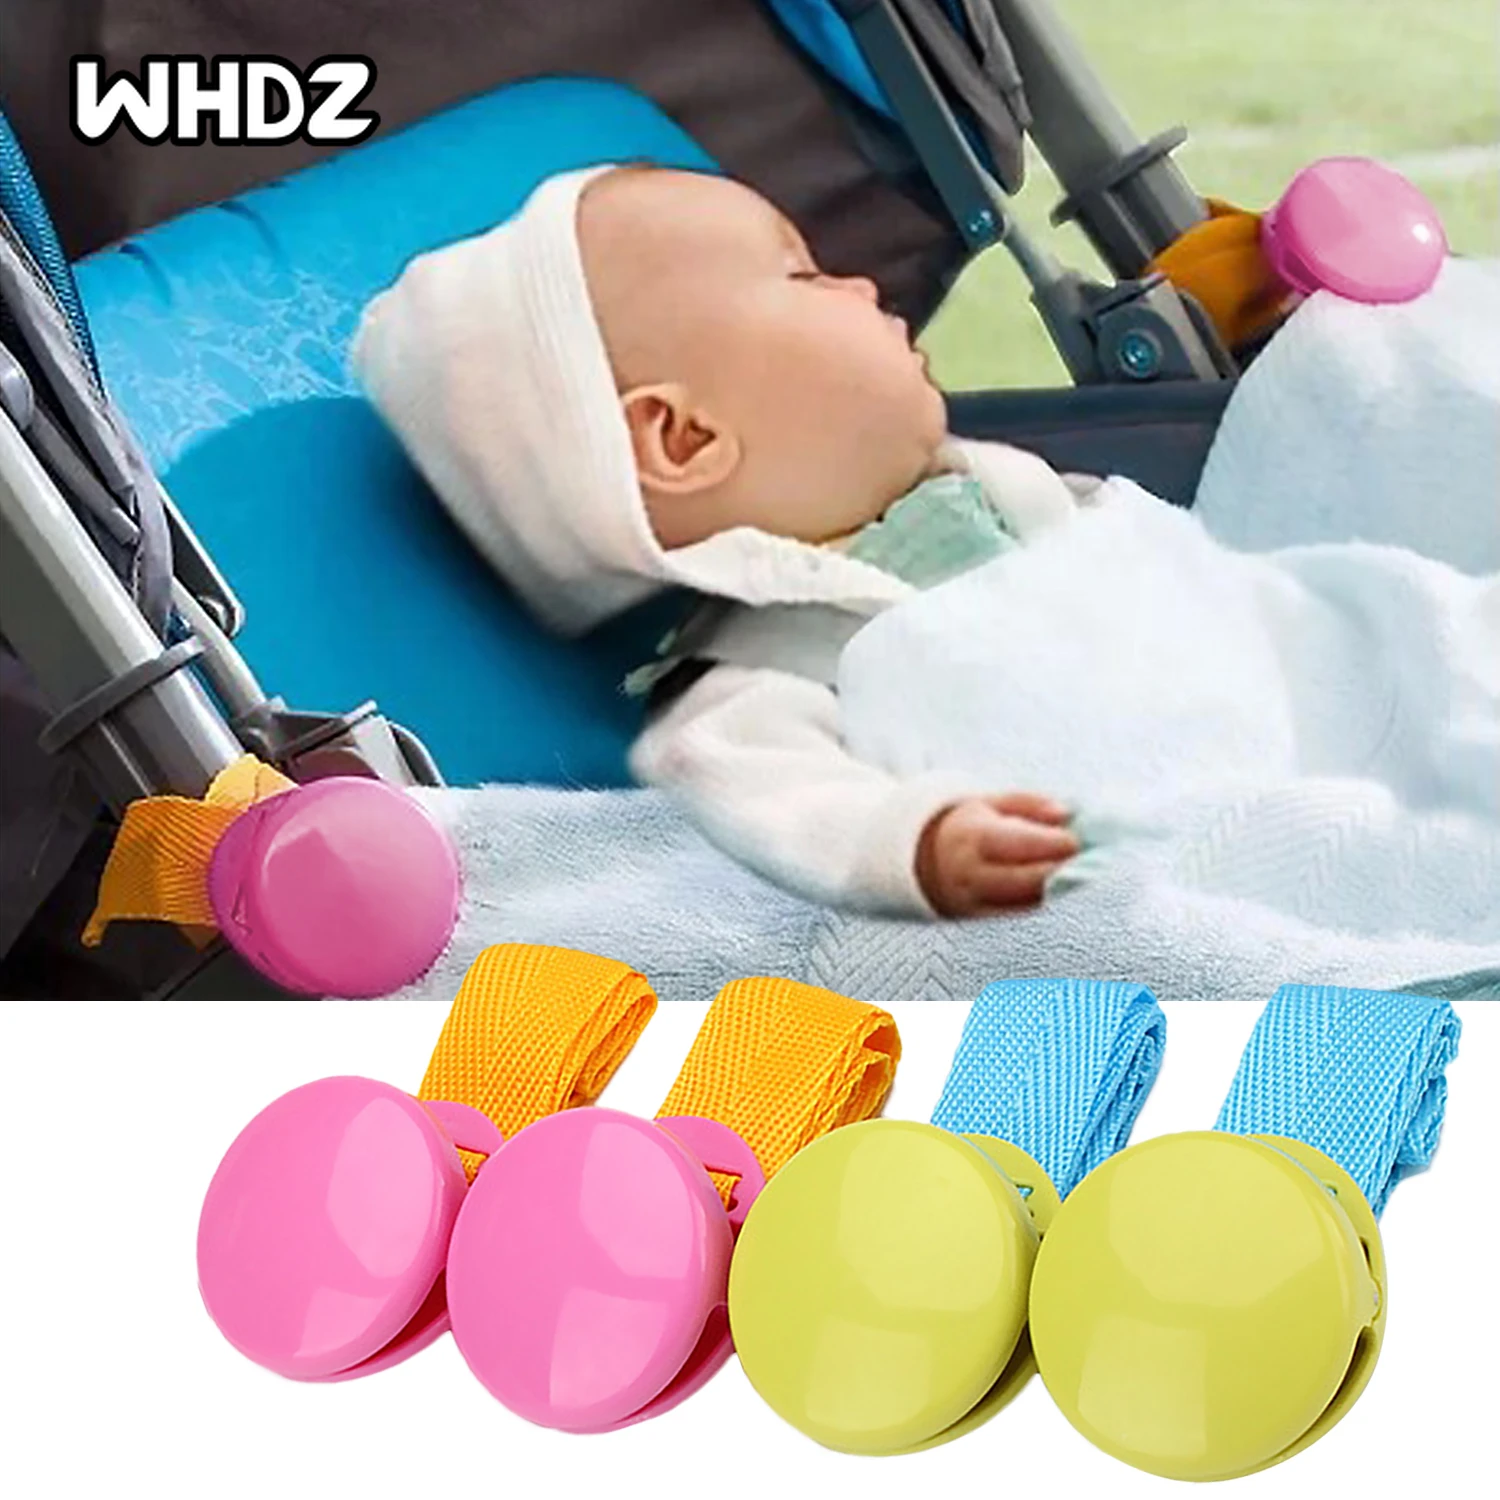 1Pair Baby Stroller Anti Tipi Clip Anti-slip Blanket Clip Fasteners Grippers Suspenders Sheet Holder Stroller Car Seat Accessory baby stroller accessories products Baby Strollers